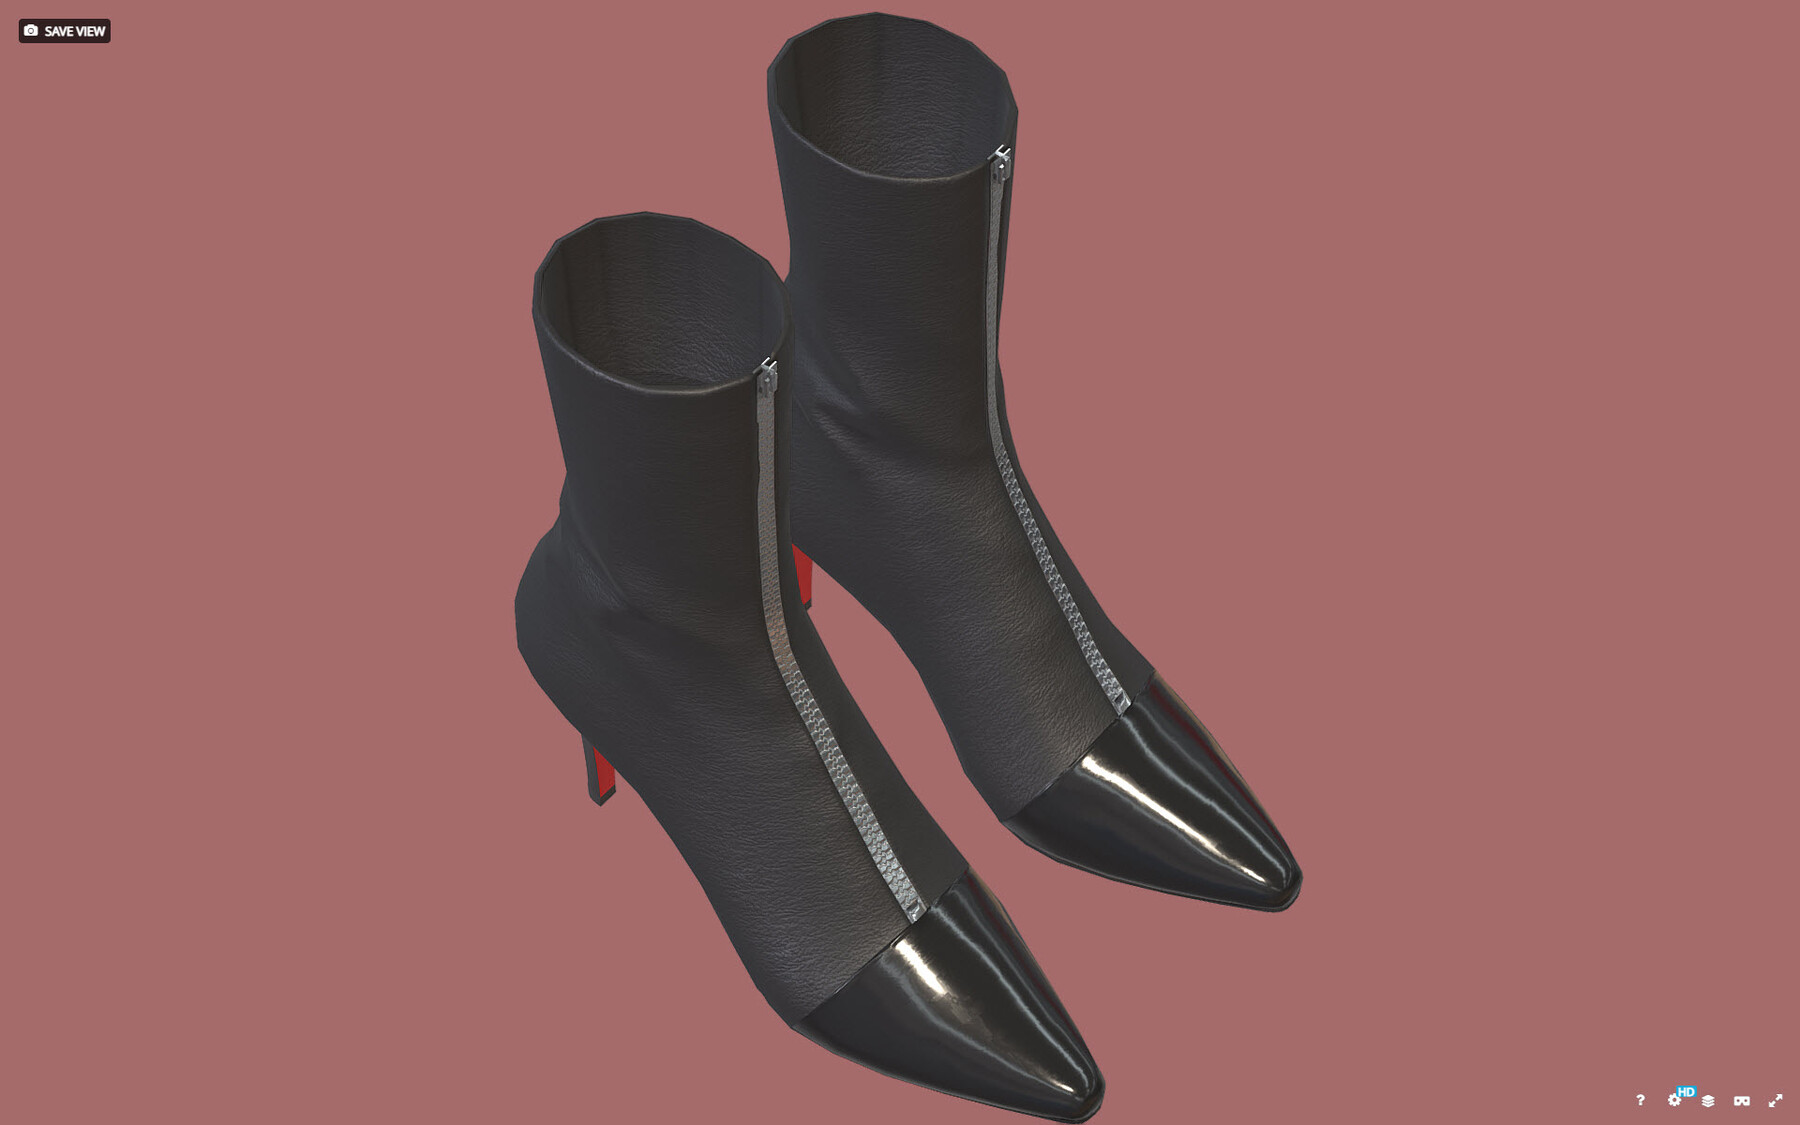 ArtStation - woman sexy high heels boots 01 shoes lowpoly model | Game ...